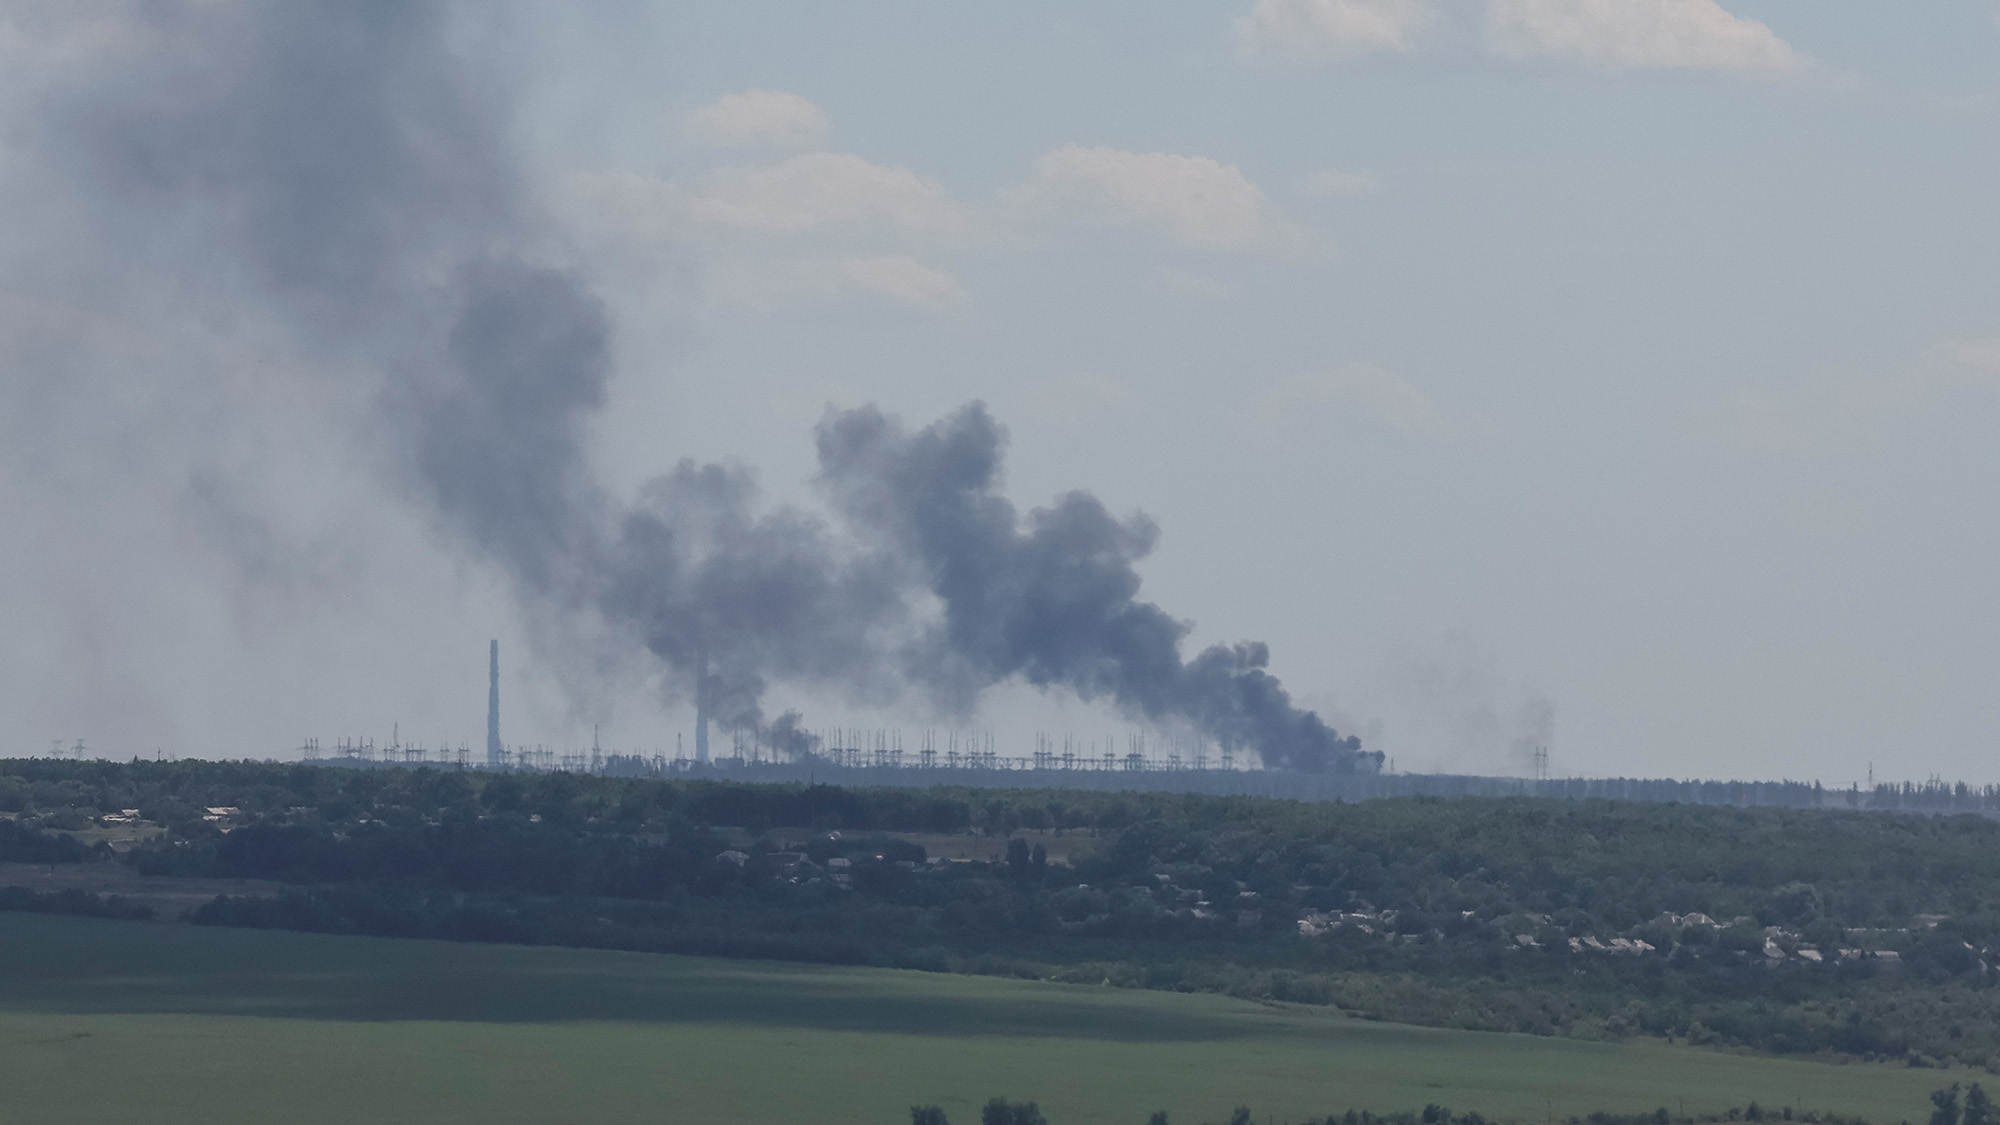 Vuhlehirsk's power plant burns in the distance after shelling in the Donetsk region on July 13.